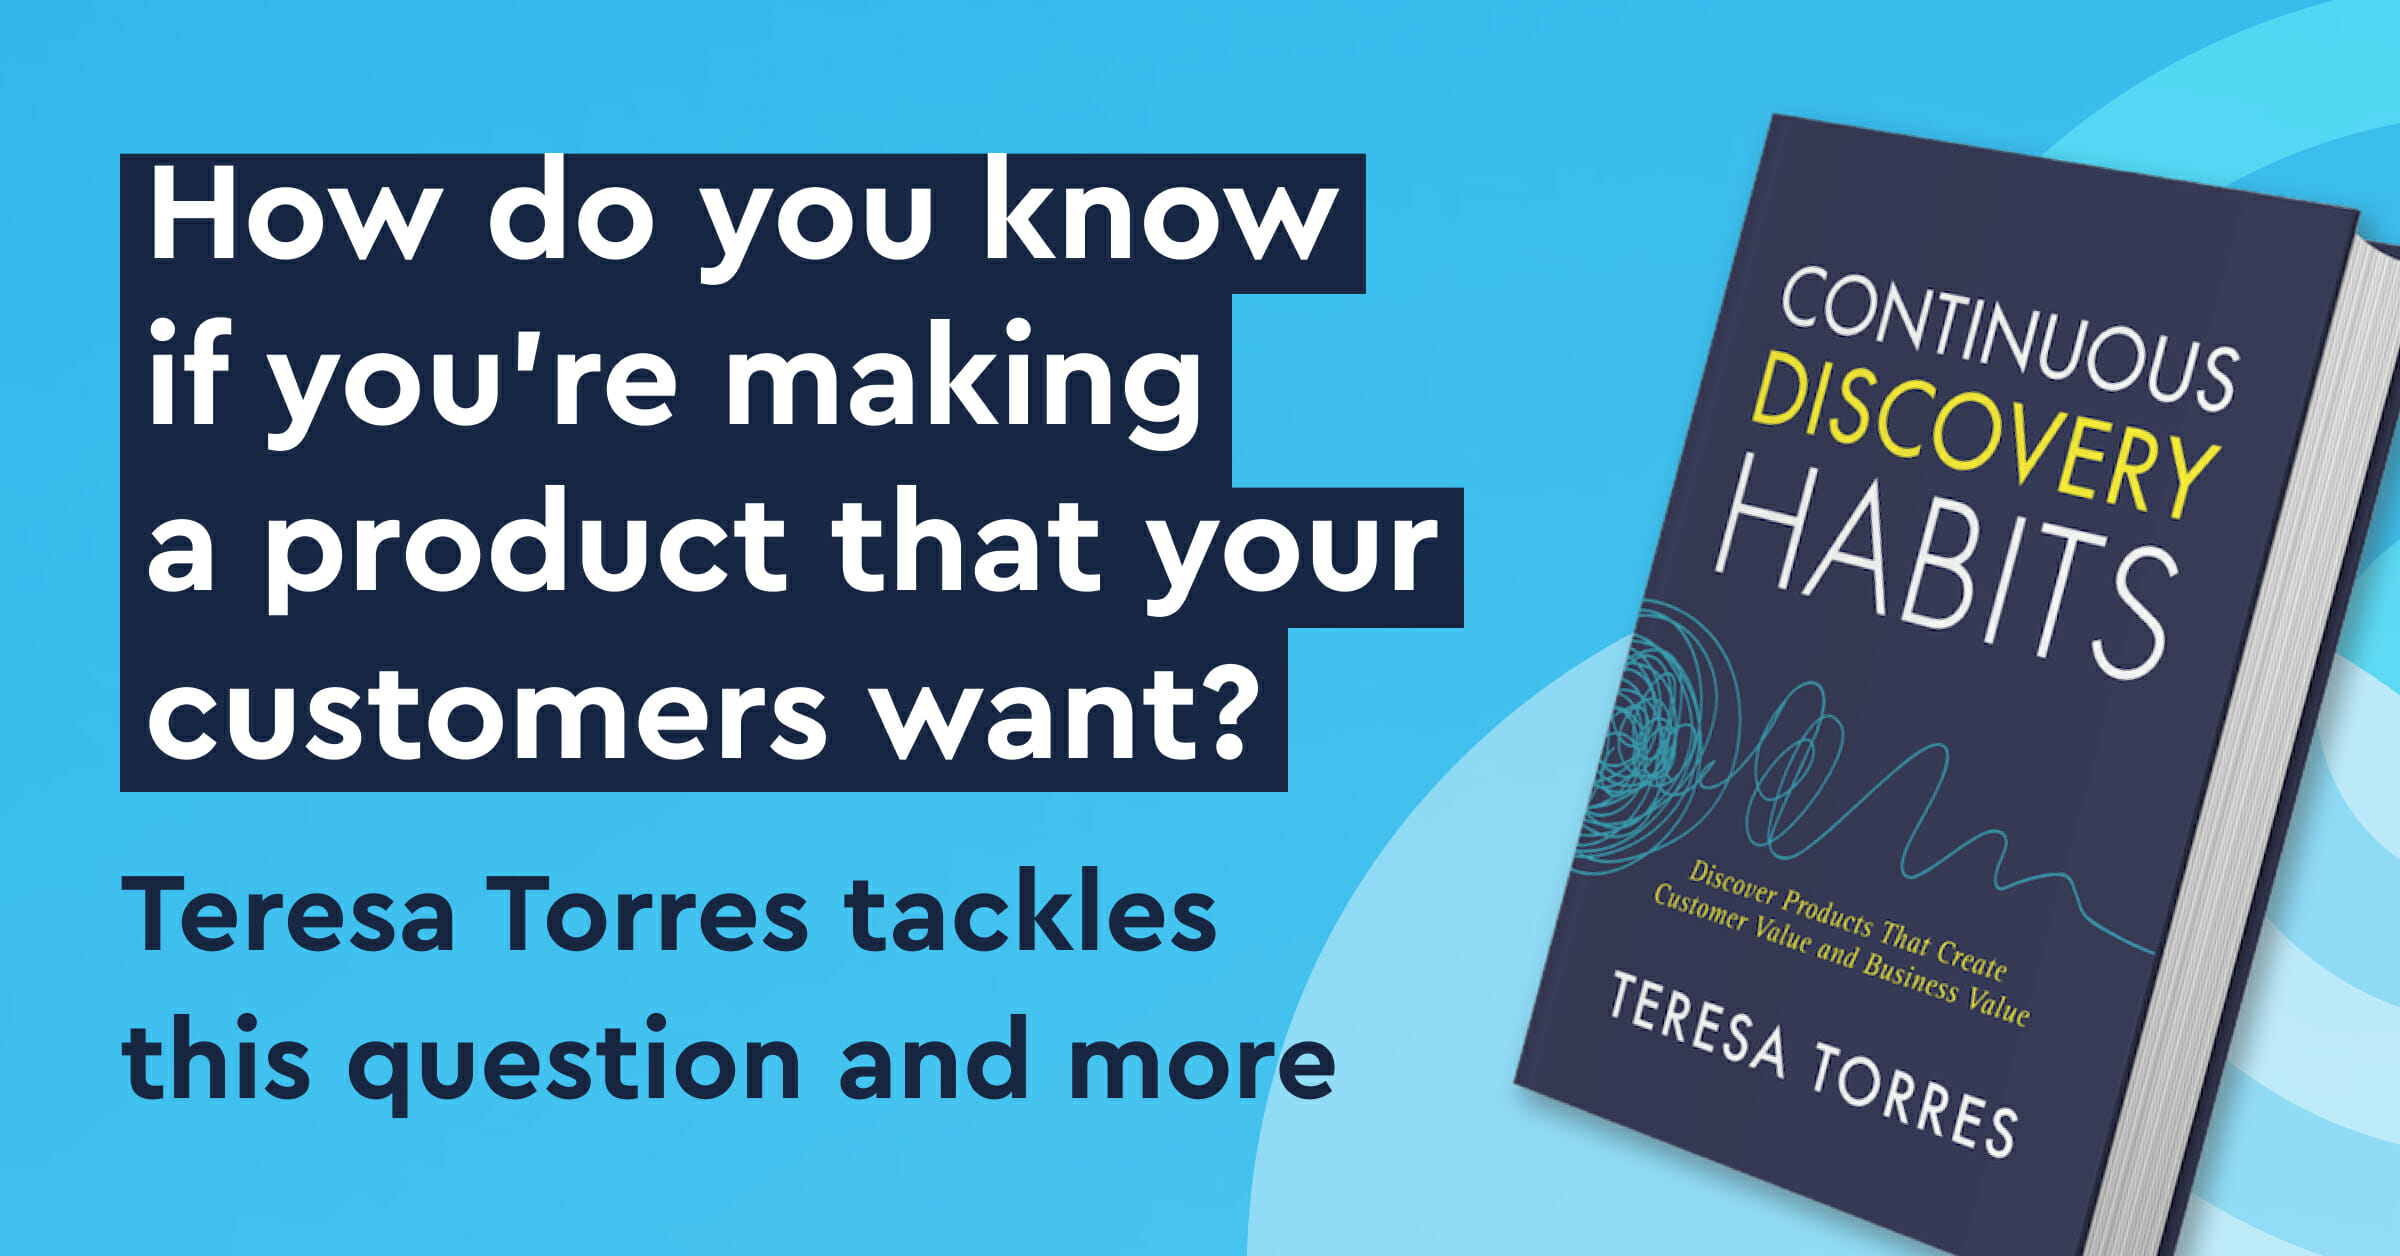 Continuous Discovery Habits book excerpt by Teresa Torres